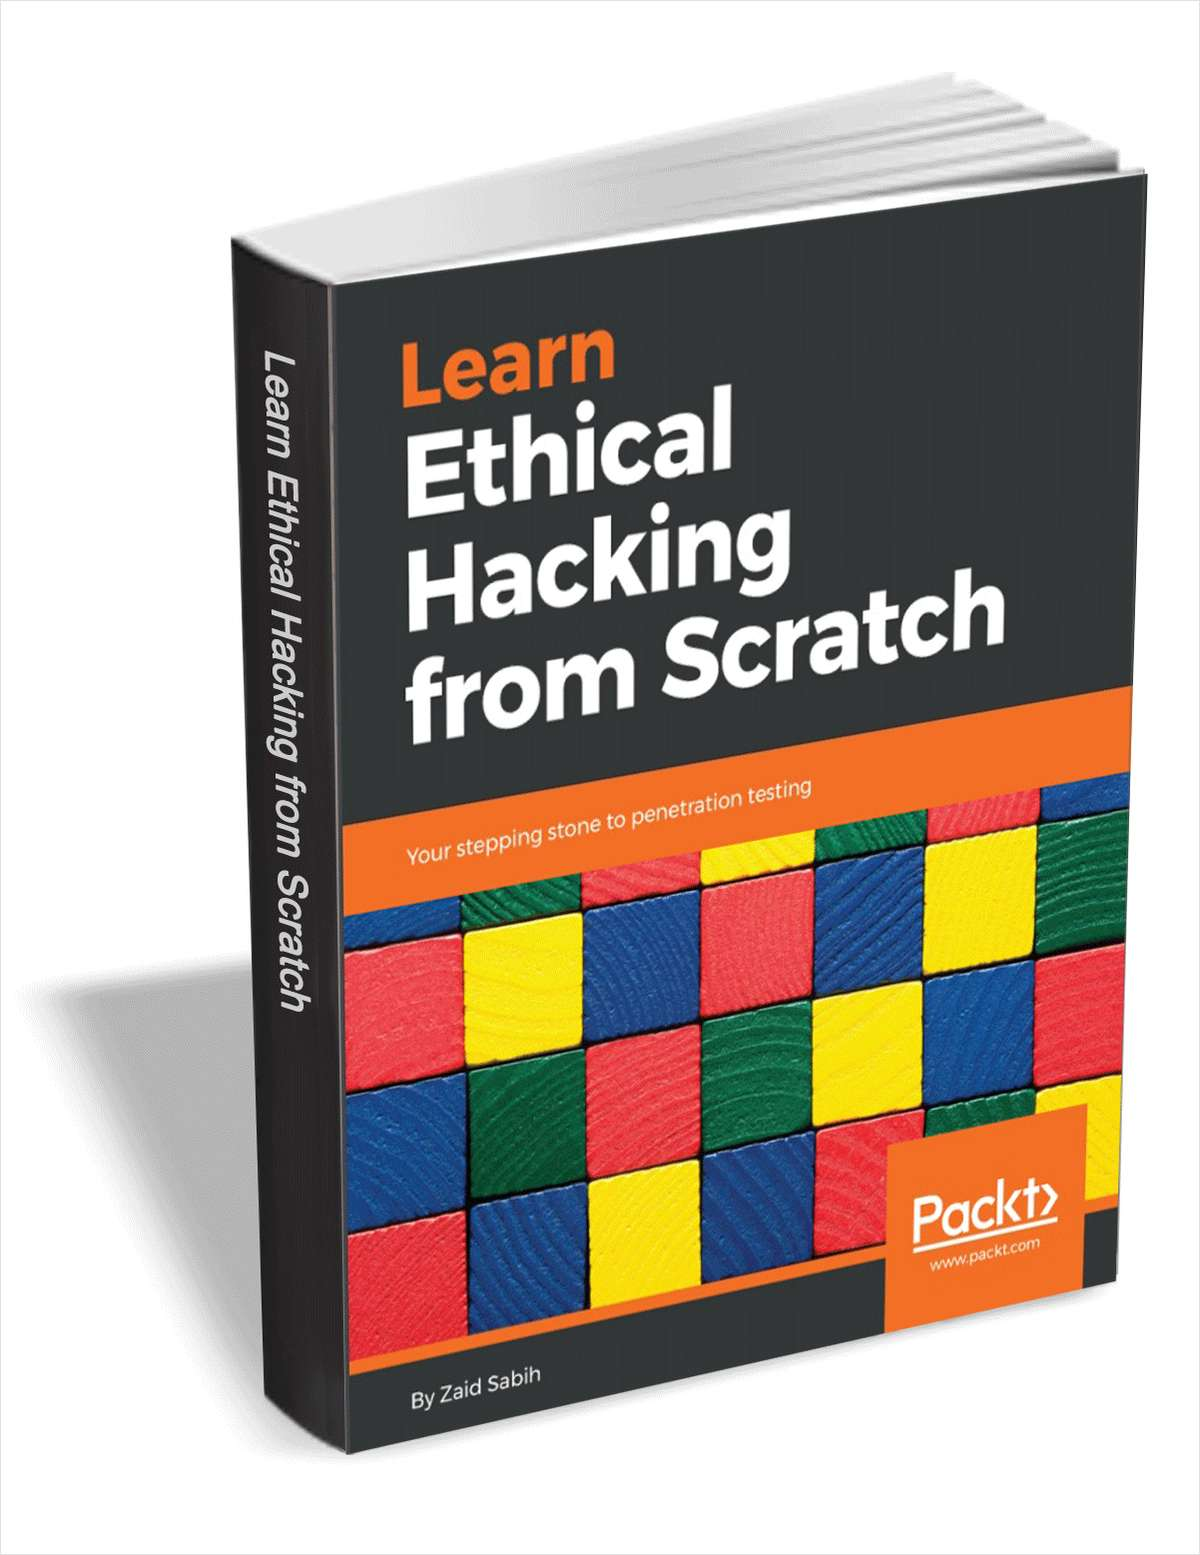 Learn Ethical Hacking from Scratch ($23 Value) FREE For a Limited Time Screenshot